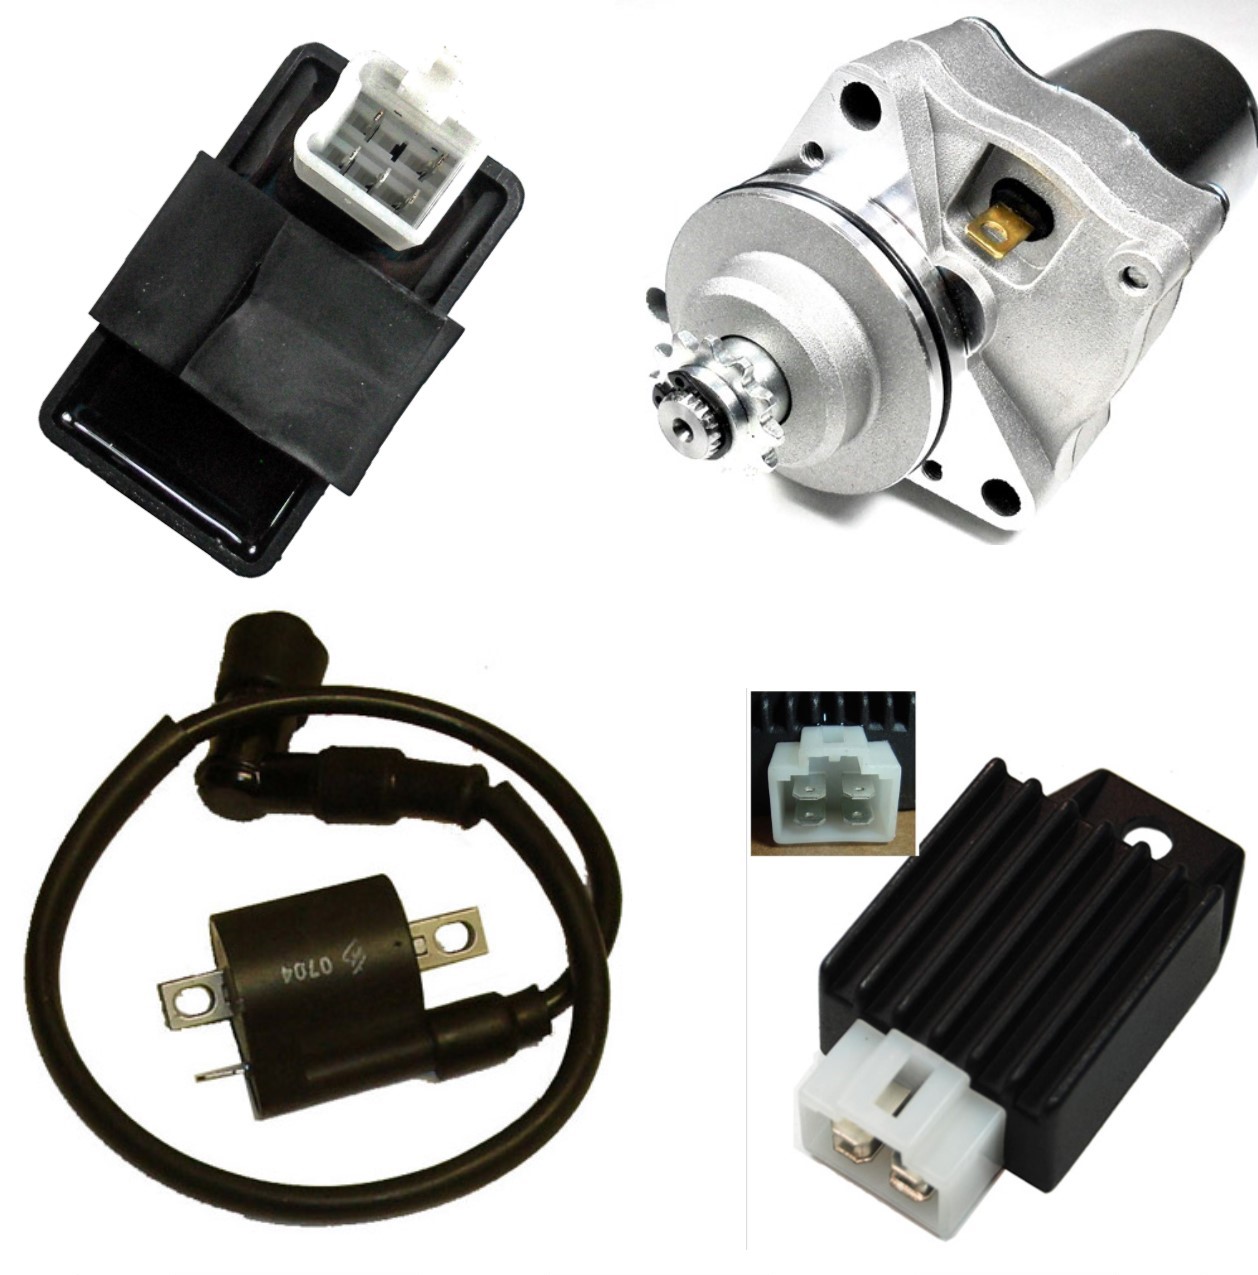 Electrical Parts Starters-CDI-Coils-Relays-Stators 70cc ATV-Dirtbikes